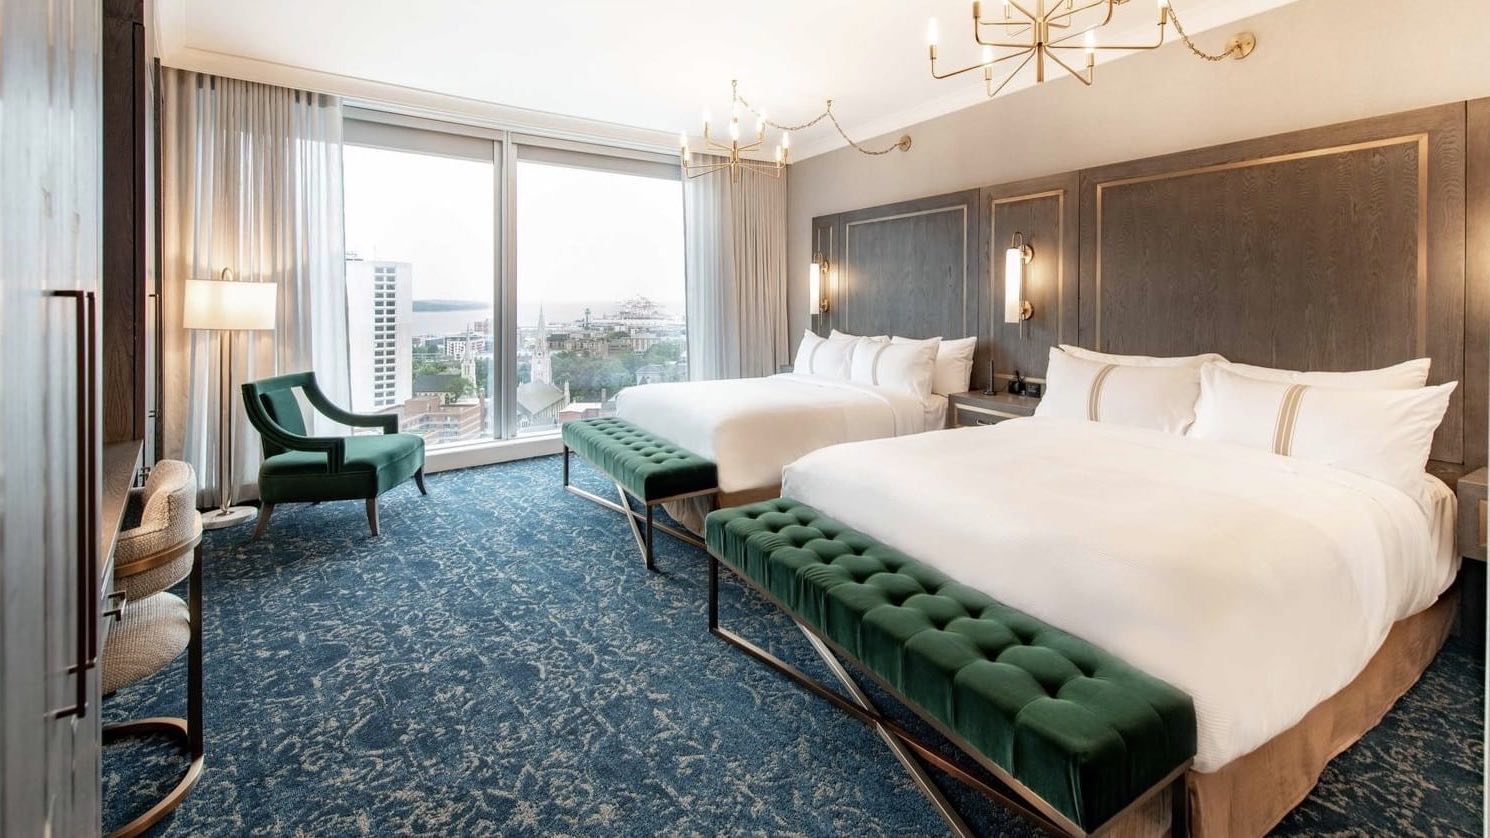 The Sutton Place Hotel bedroom with city view